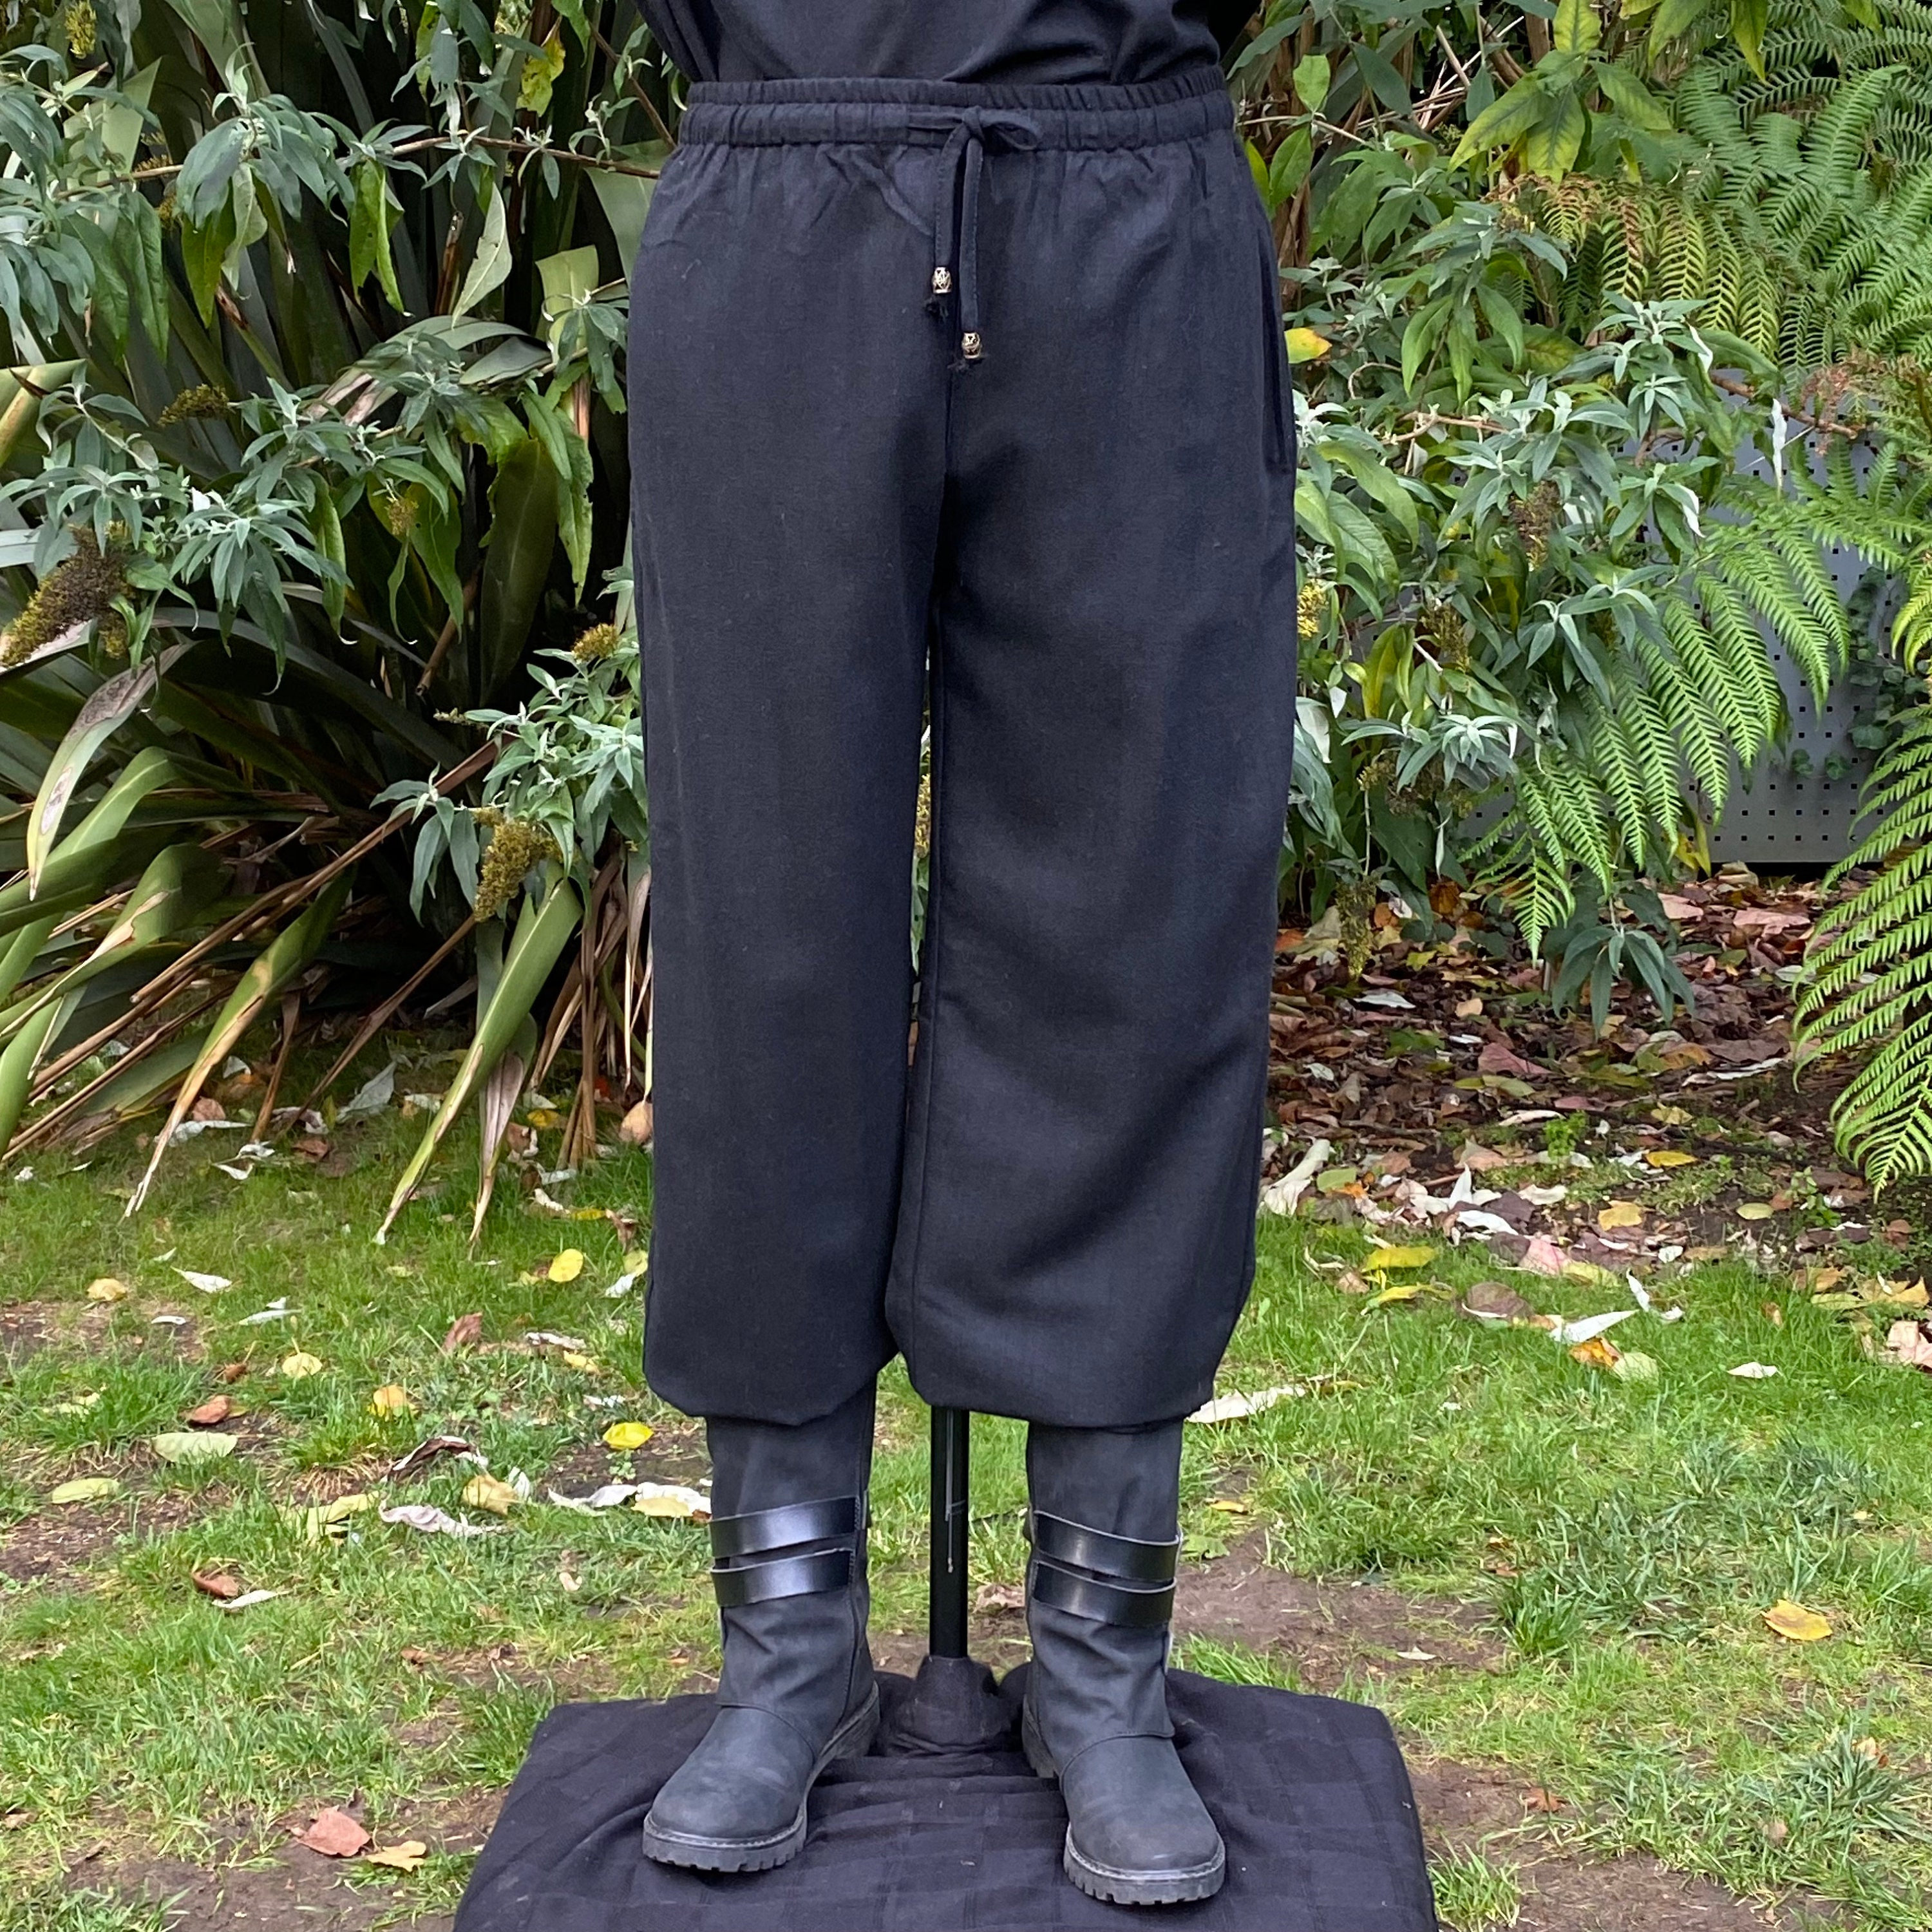 Medieval Straight Leg Trousers, Black Wool Pants, for LARP, Renaissance  Faire, Viking Cosplay, or History Events, Perfect for Slimmer Build -   Singapore